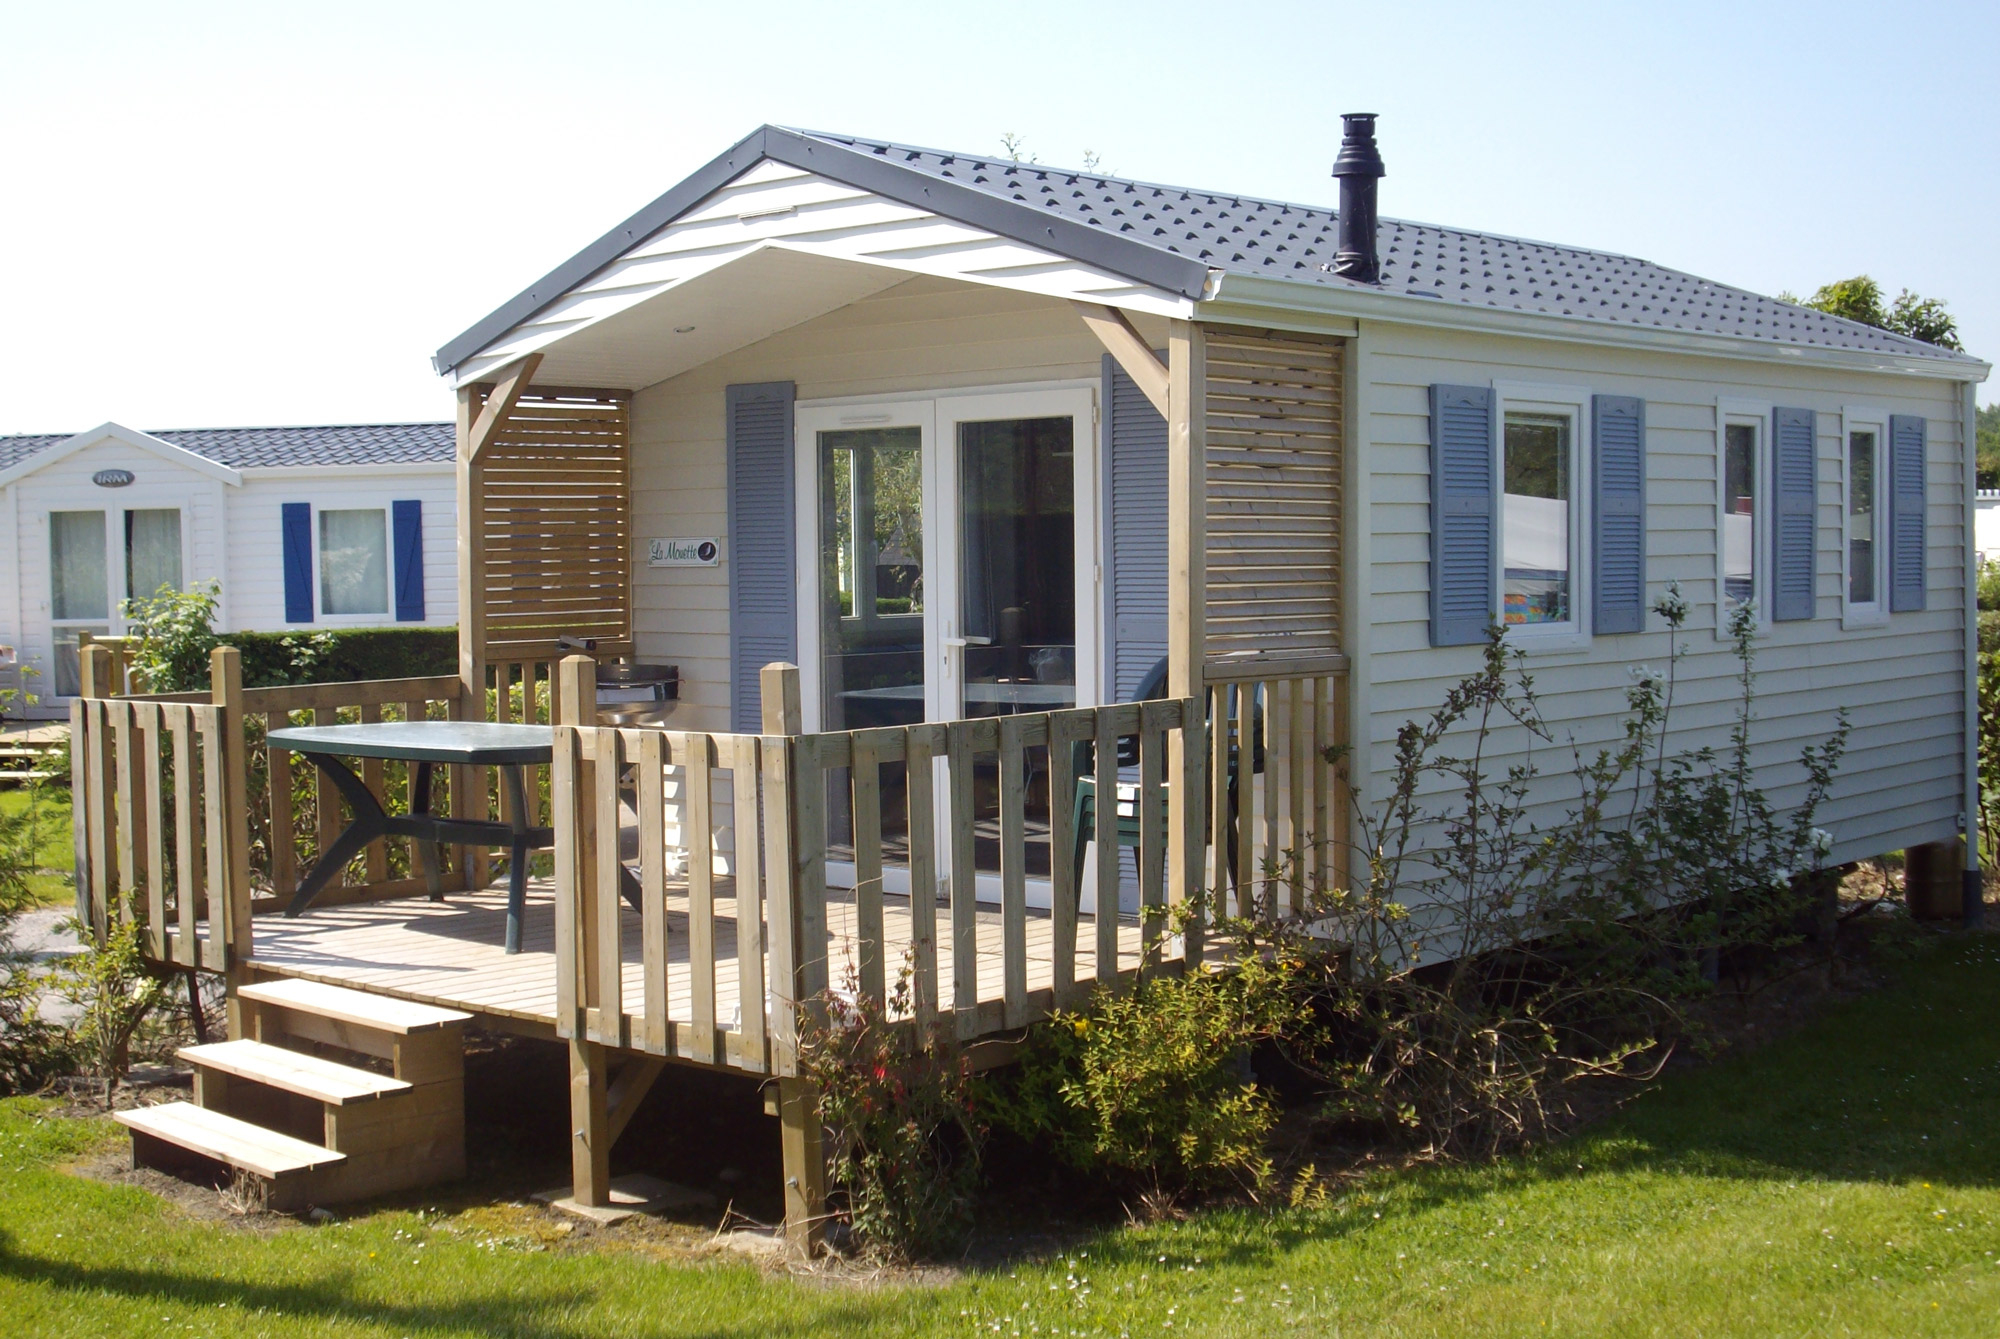 Location Mobil-Home Baie De Somme (80) | Camping Le Champ Neuf dedans Grand Mobil Home Neuf 4 Chambres